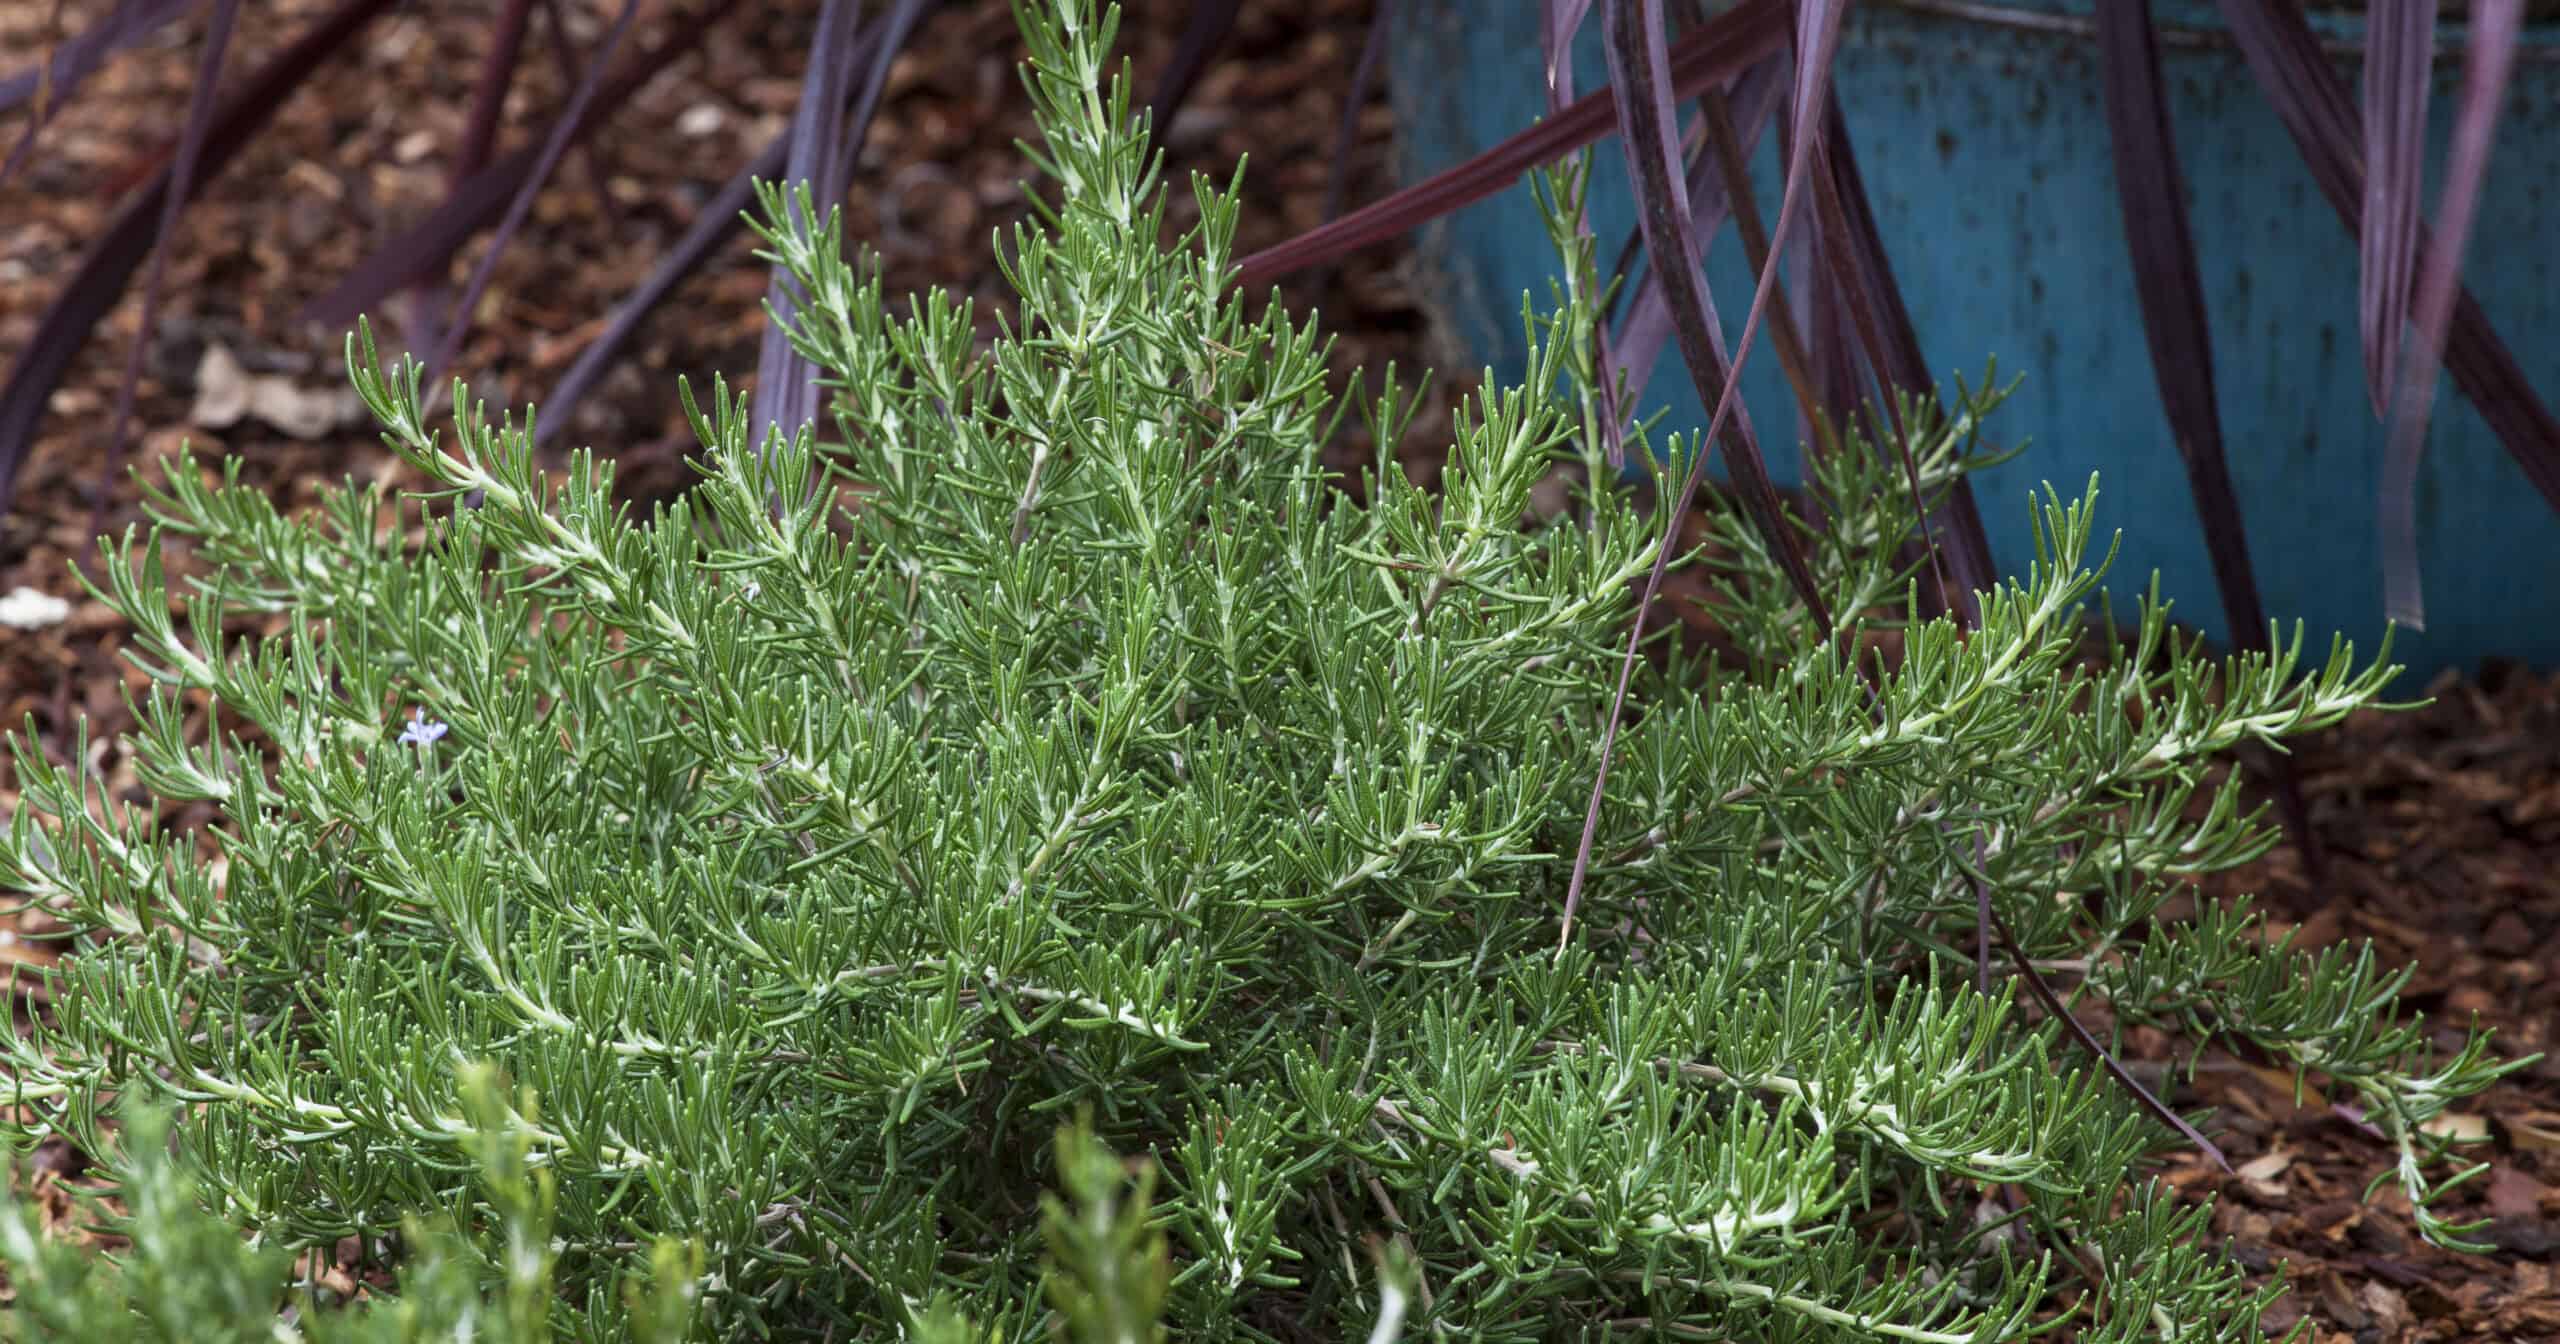 Chef's choice rosemary in front of turquoise container with purple phormium black adder grass